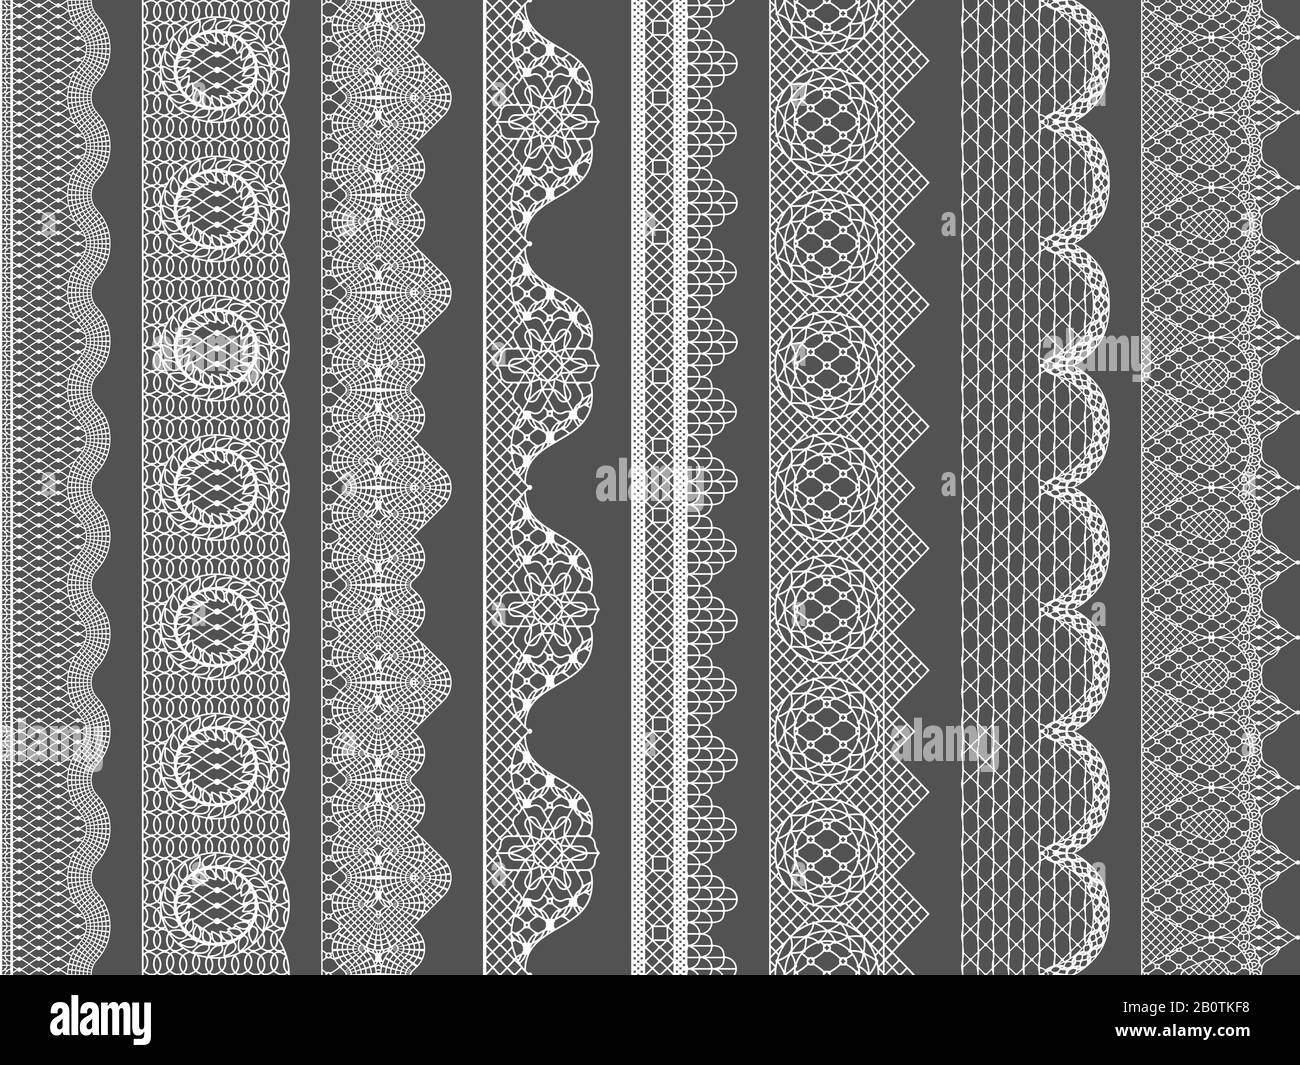 Floral Seamless Lace Pattern , Vectors